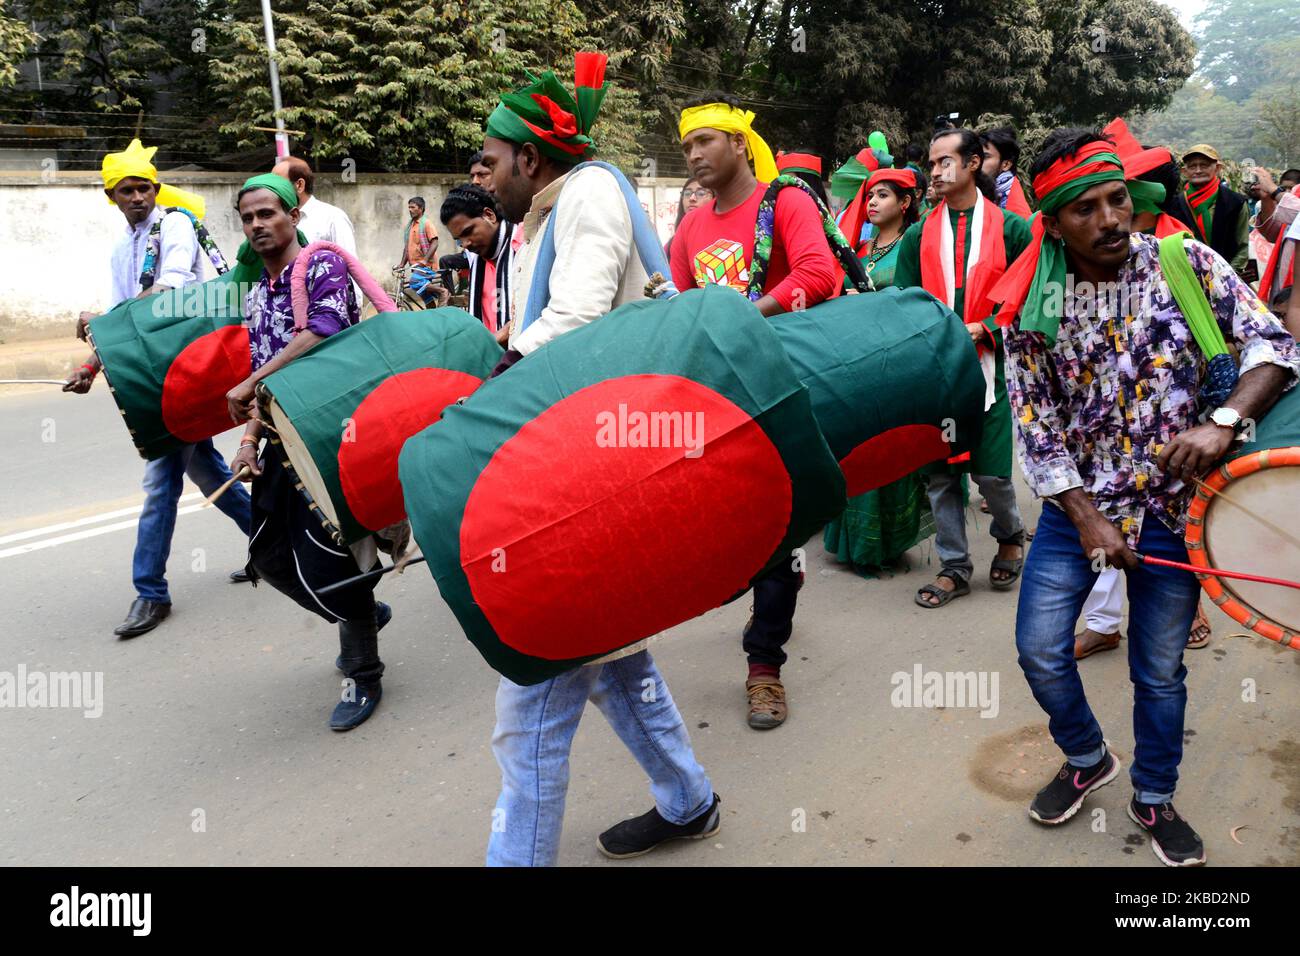 Bangladeshi people participate in a rally during the Victory Day celebrations in Dhaka, Bangladesh on December 16, 2019. Bangladesh marks its 48th Victory Day to commemorate the victory of the Allied forces High Command over the Pakistani forces in the Bangladesh Liberation War in 1971. Bangladesh became a free nation on 16 December 1971 after a nine-month bloody war with Pakistan. (Photo by Mamunur Rashid/NurPhoto) Stock Photo